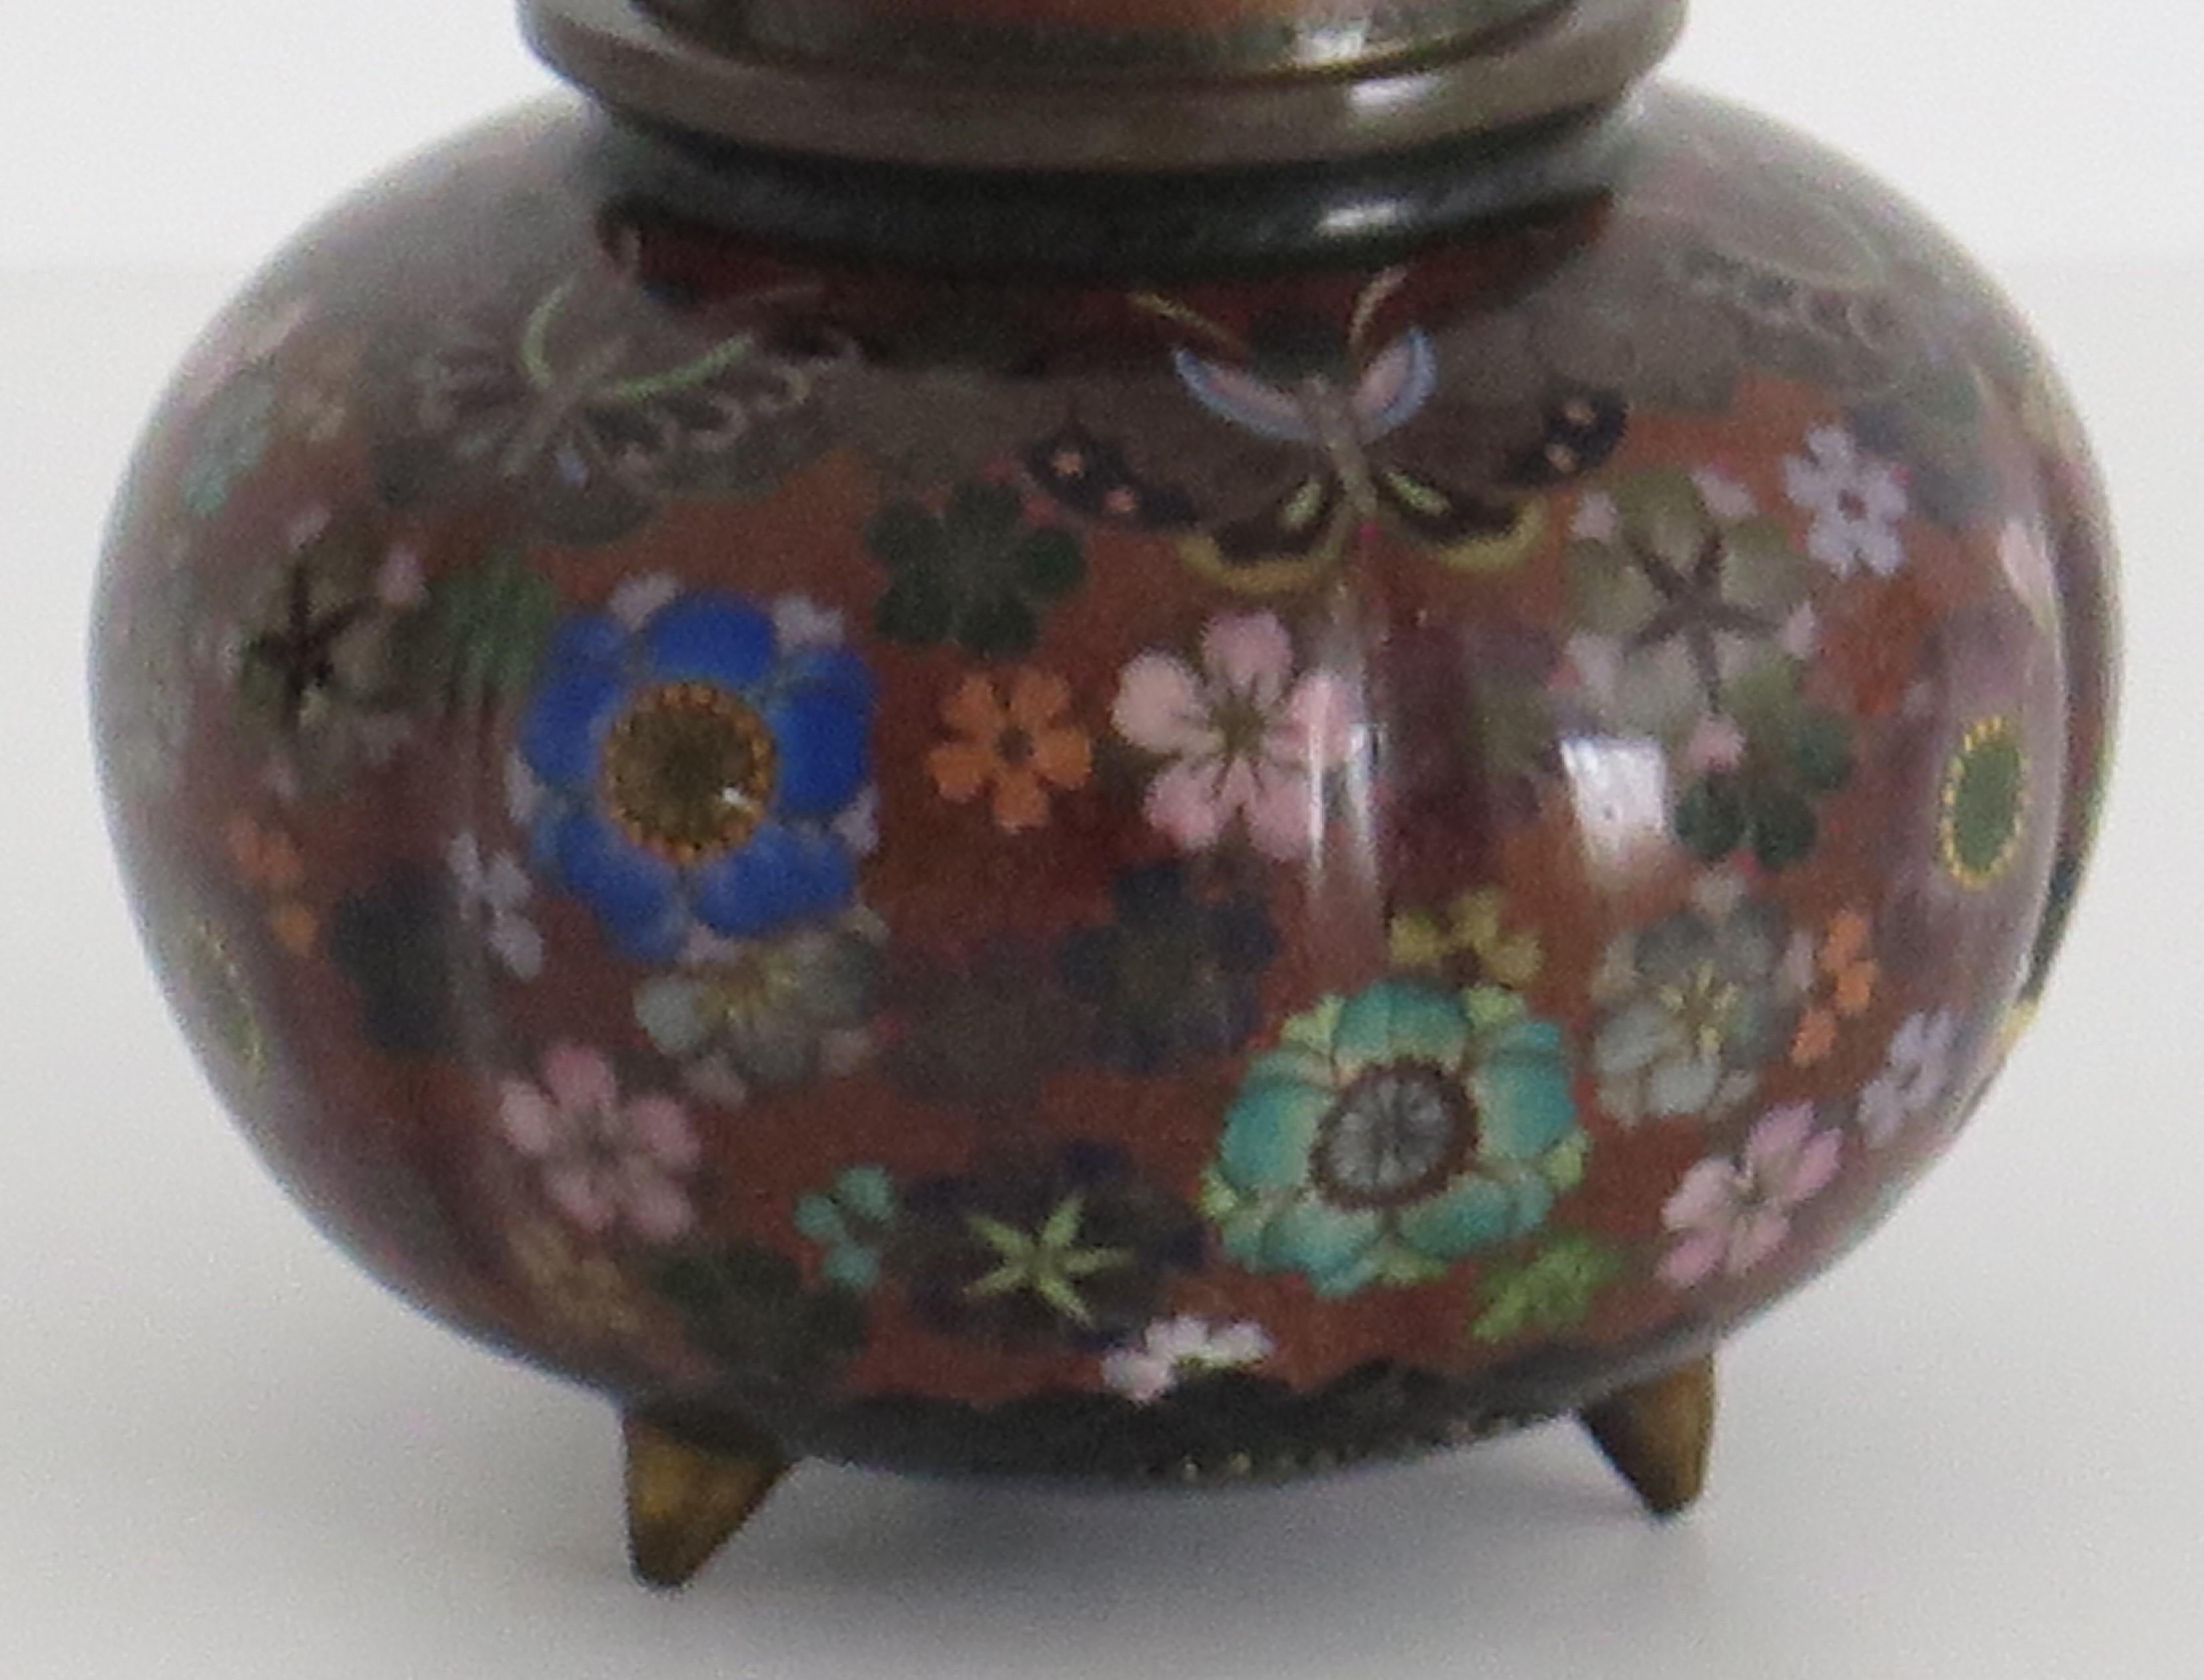 This is a very decorative cloisonné lidded jar, made in Japan and dating to the 19th century, early Meiji period, circa 1875 or possibly earlier.

The jar has a good shape of a compressed globular form with a short neck and standing on three short